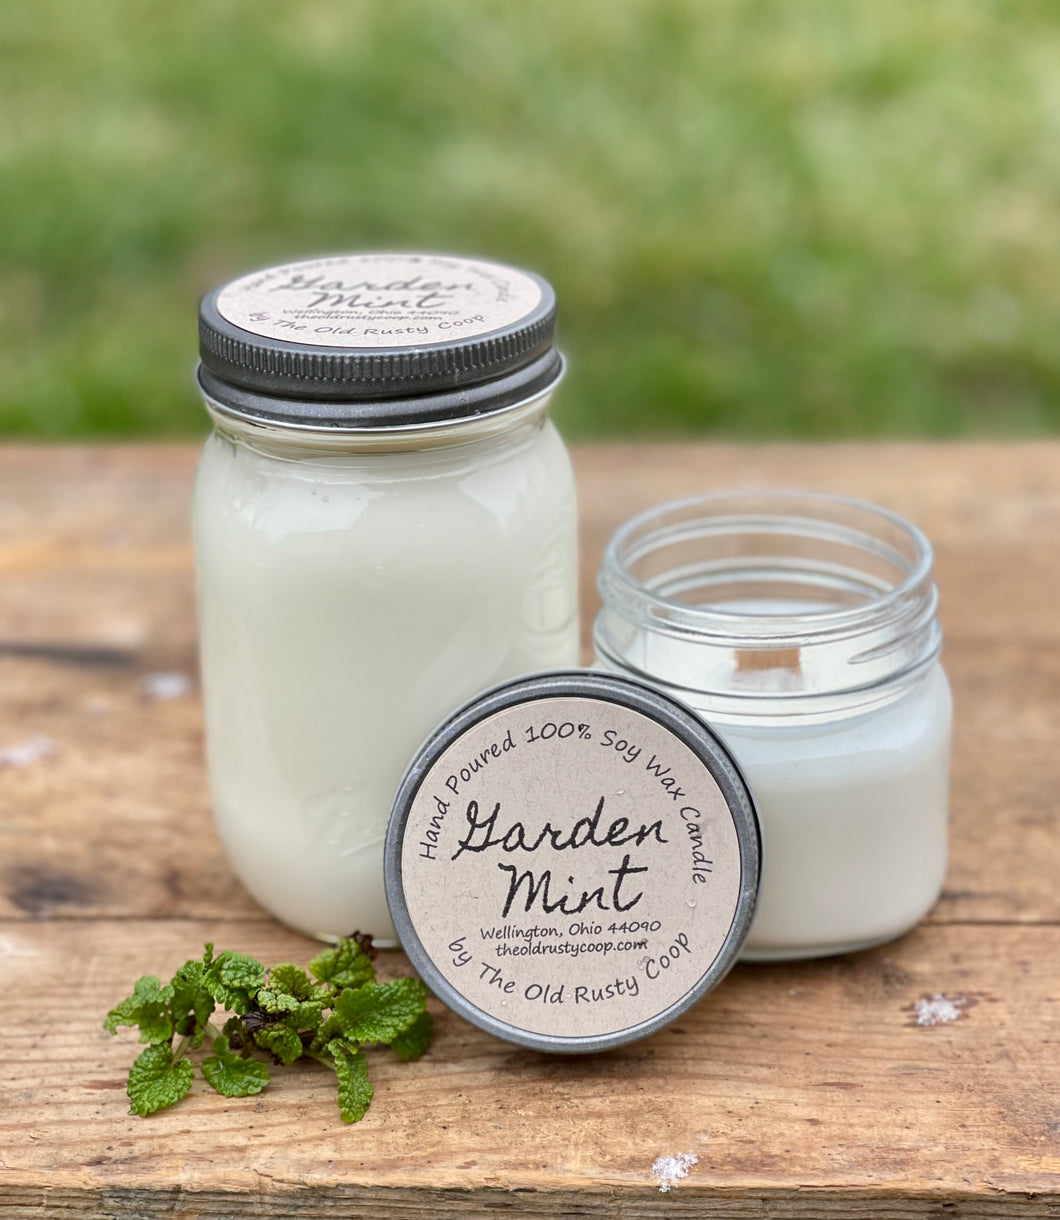 Garden Mint ~ Hand Poured 100% Soy Wax Candles